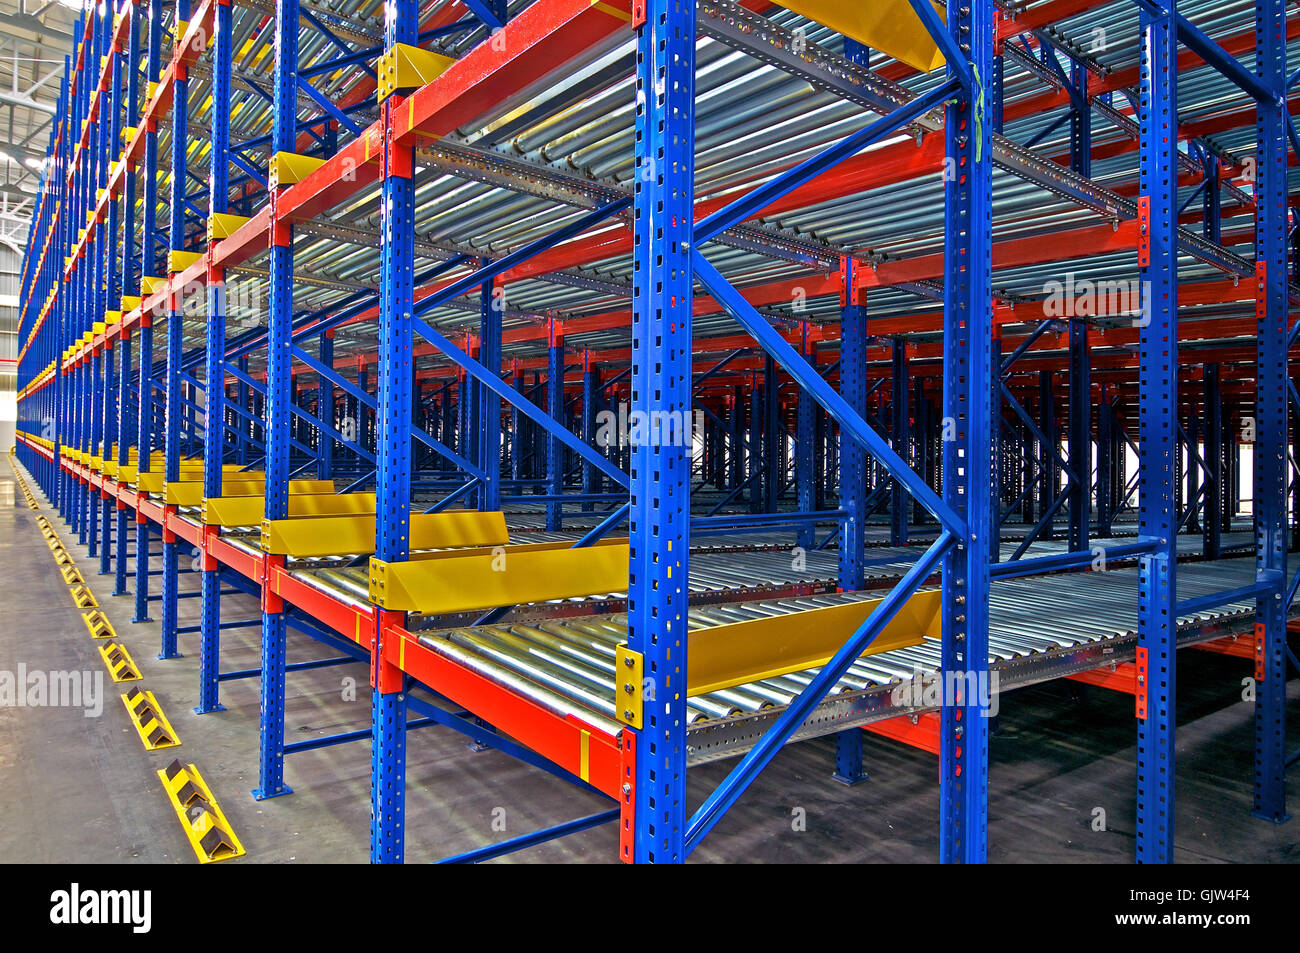 Warehouse  shelving storage Inside view of metal, pallet racking system Stock Photo